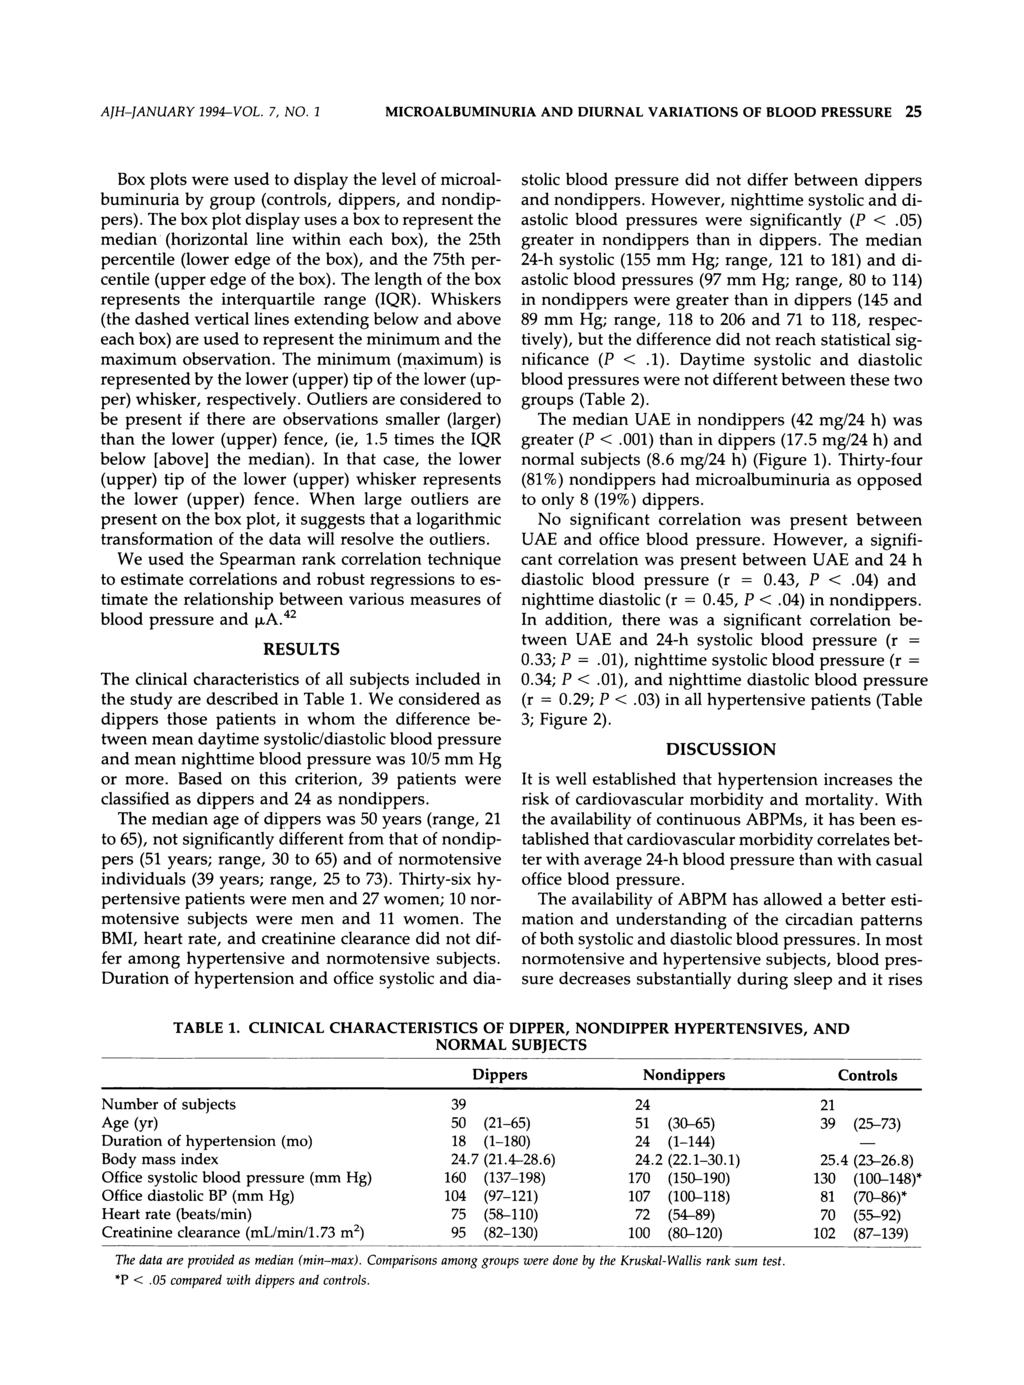 AJH-JANUARY 1994-VOL. 7, NO. 1 MICROALBUMINURIA AND DIURNAL VARIATIONS OF BLOOD PRESSURE 25 Box plots were used to display the level of microalbuminuria by group (controls, dippers, and nondippers).